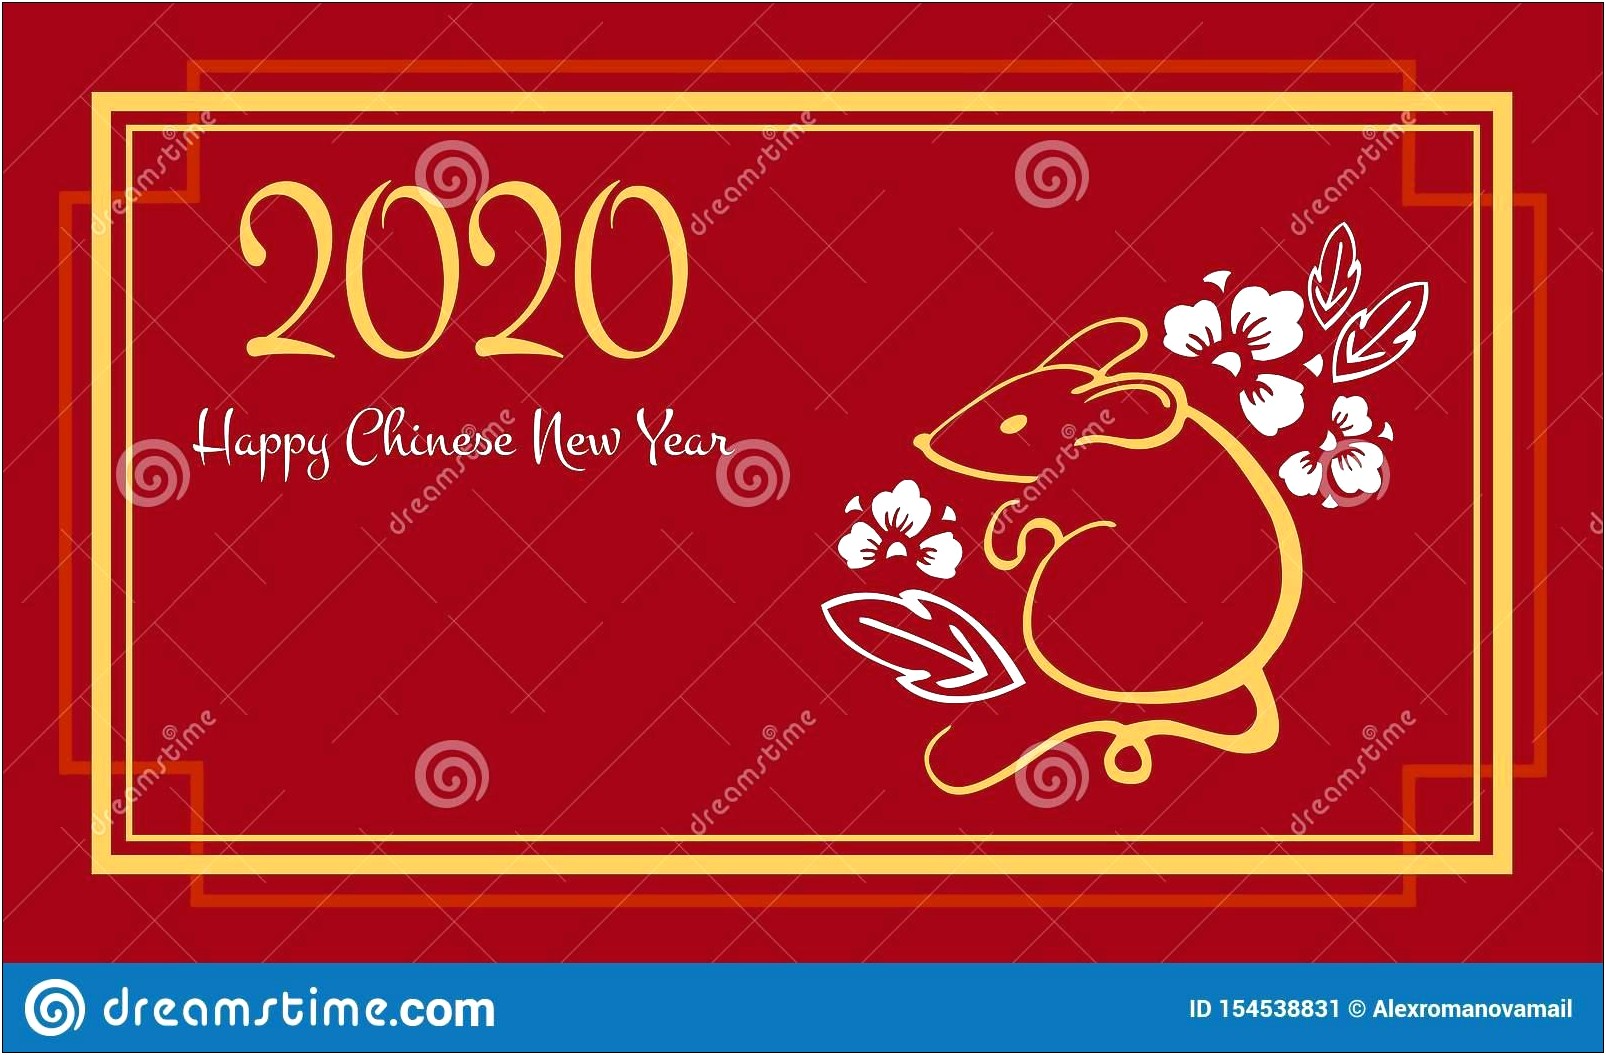 Free Chinese New Year Powerpoint Templates